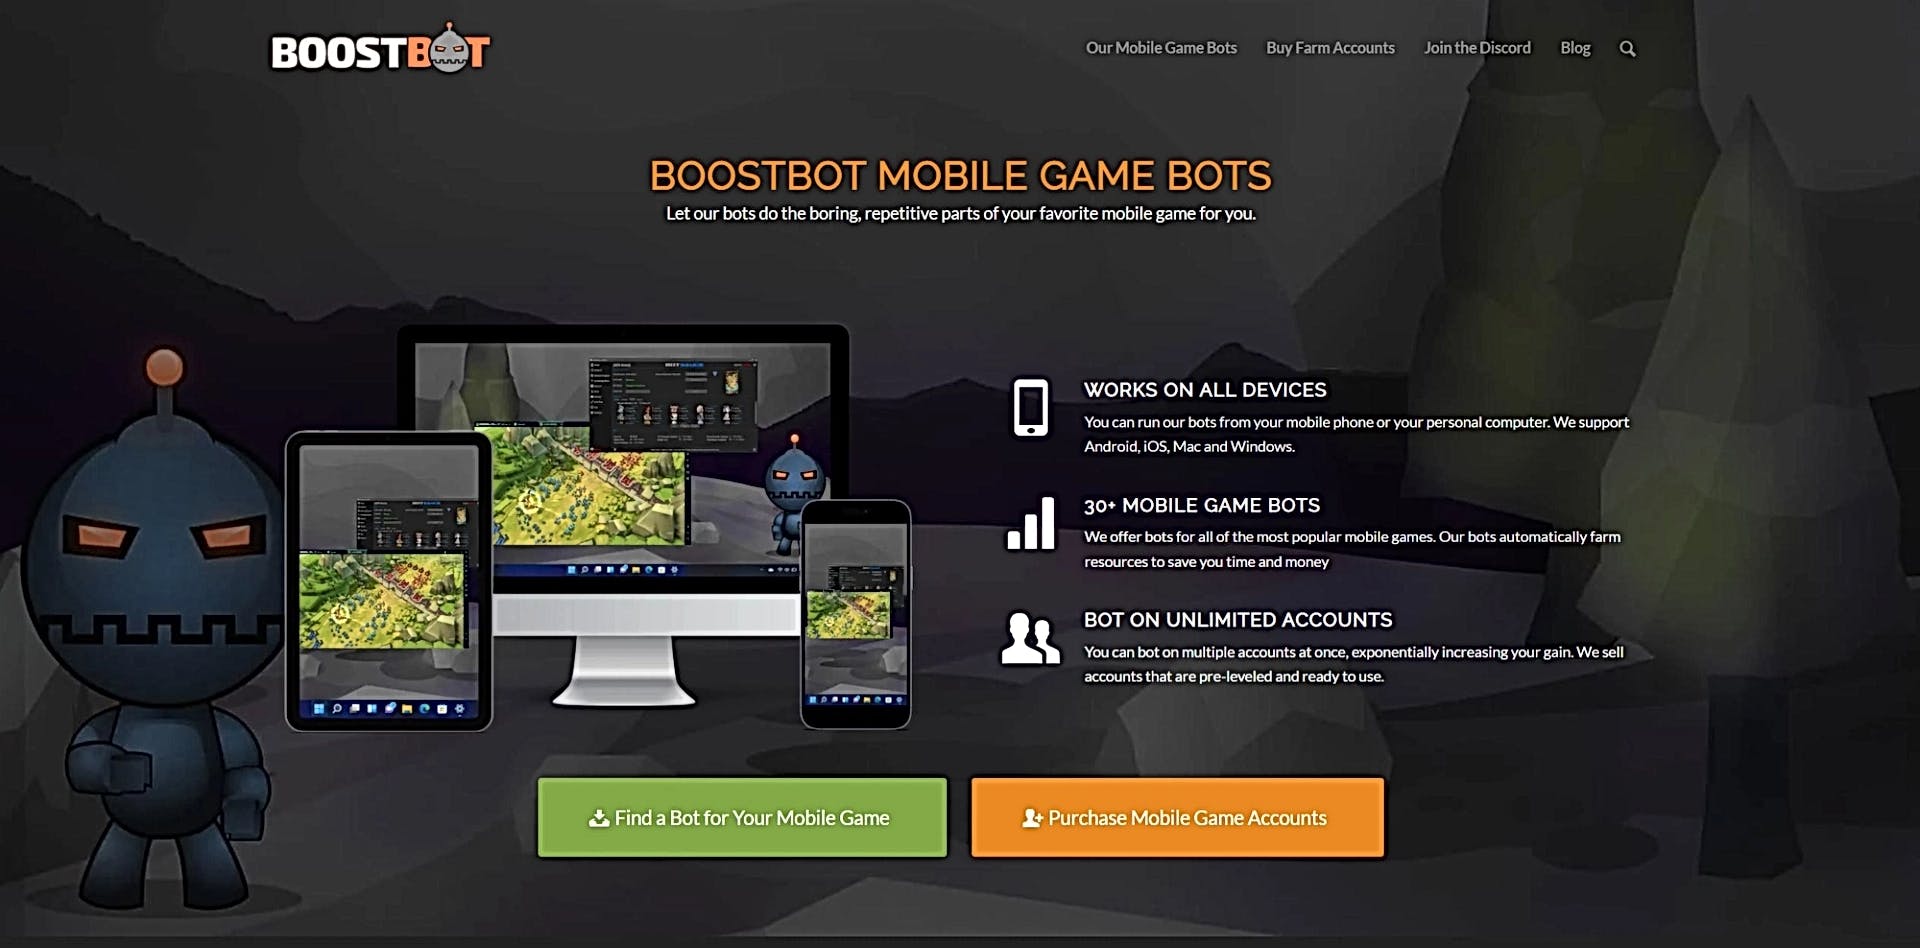 Boostbot featured